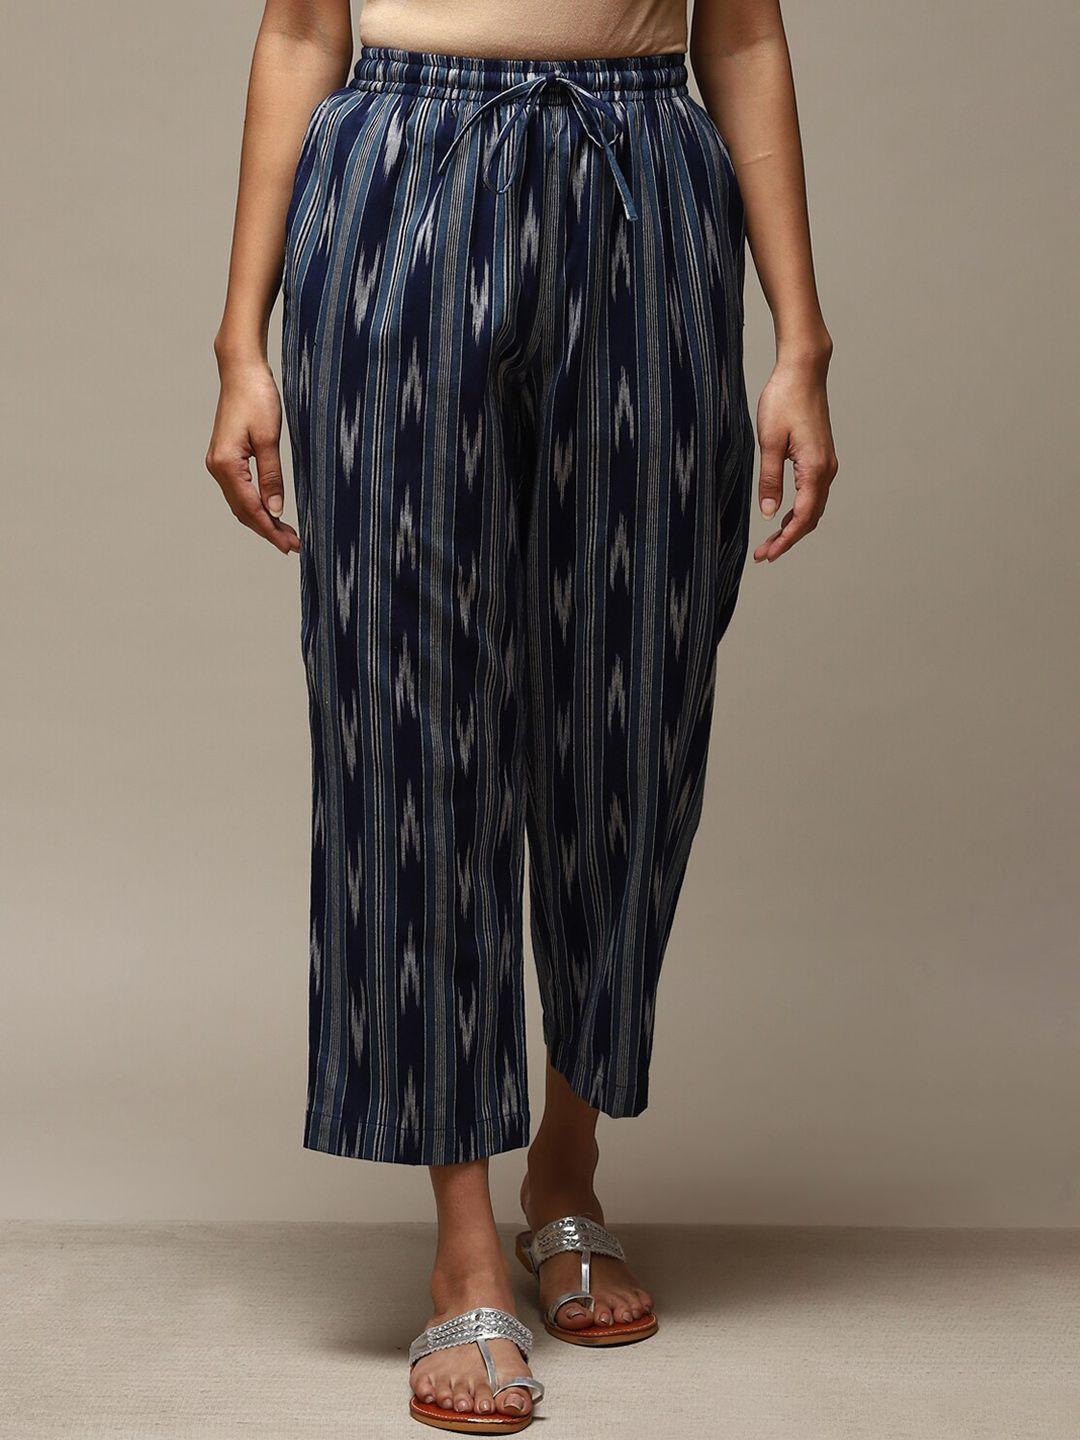 biba women relaxed striped mid-rise cotton trousers